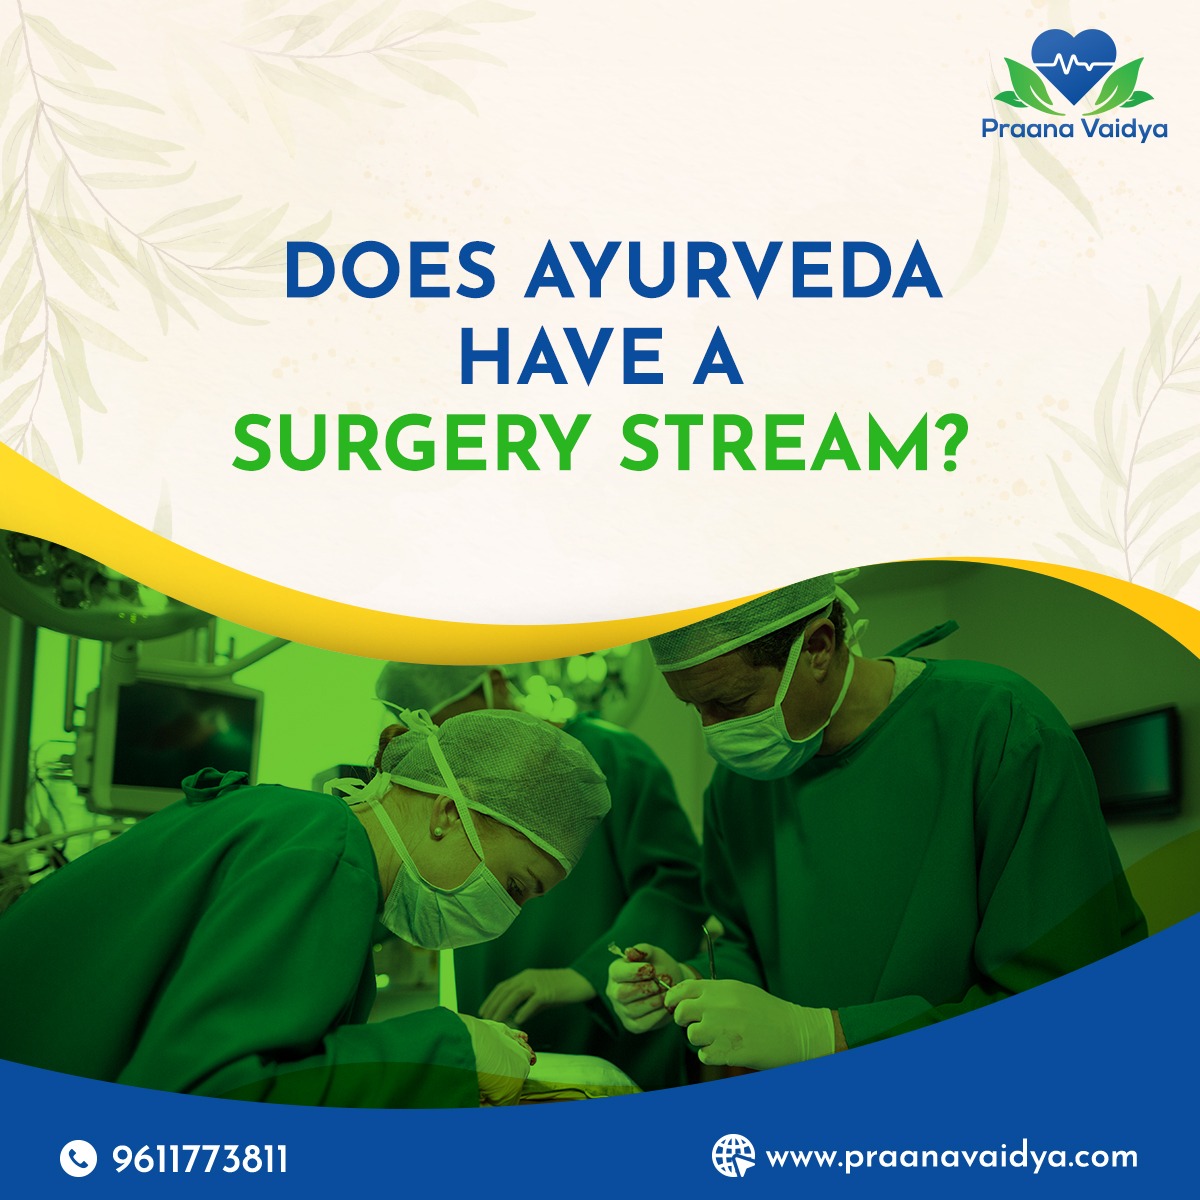 Does Ayurveda have a surgery stream?